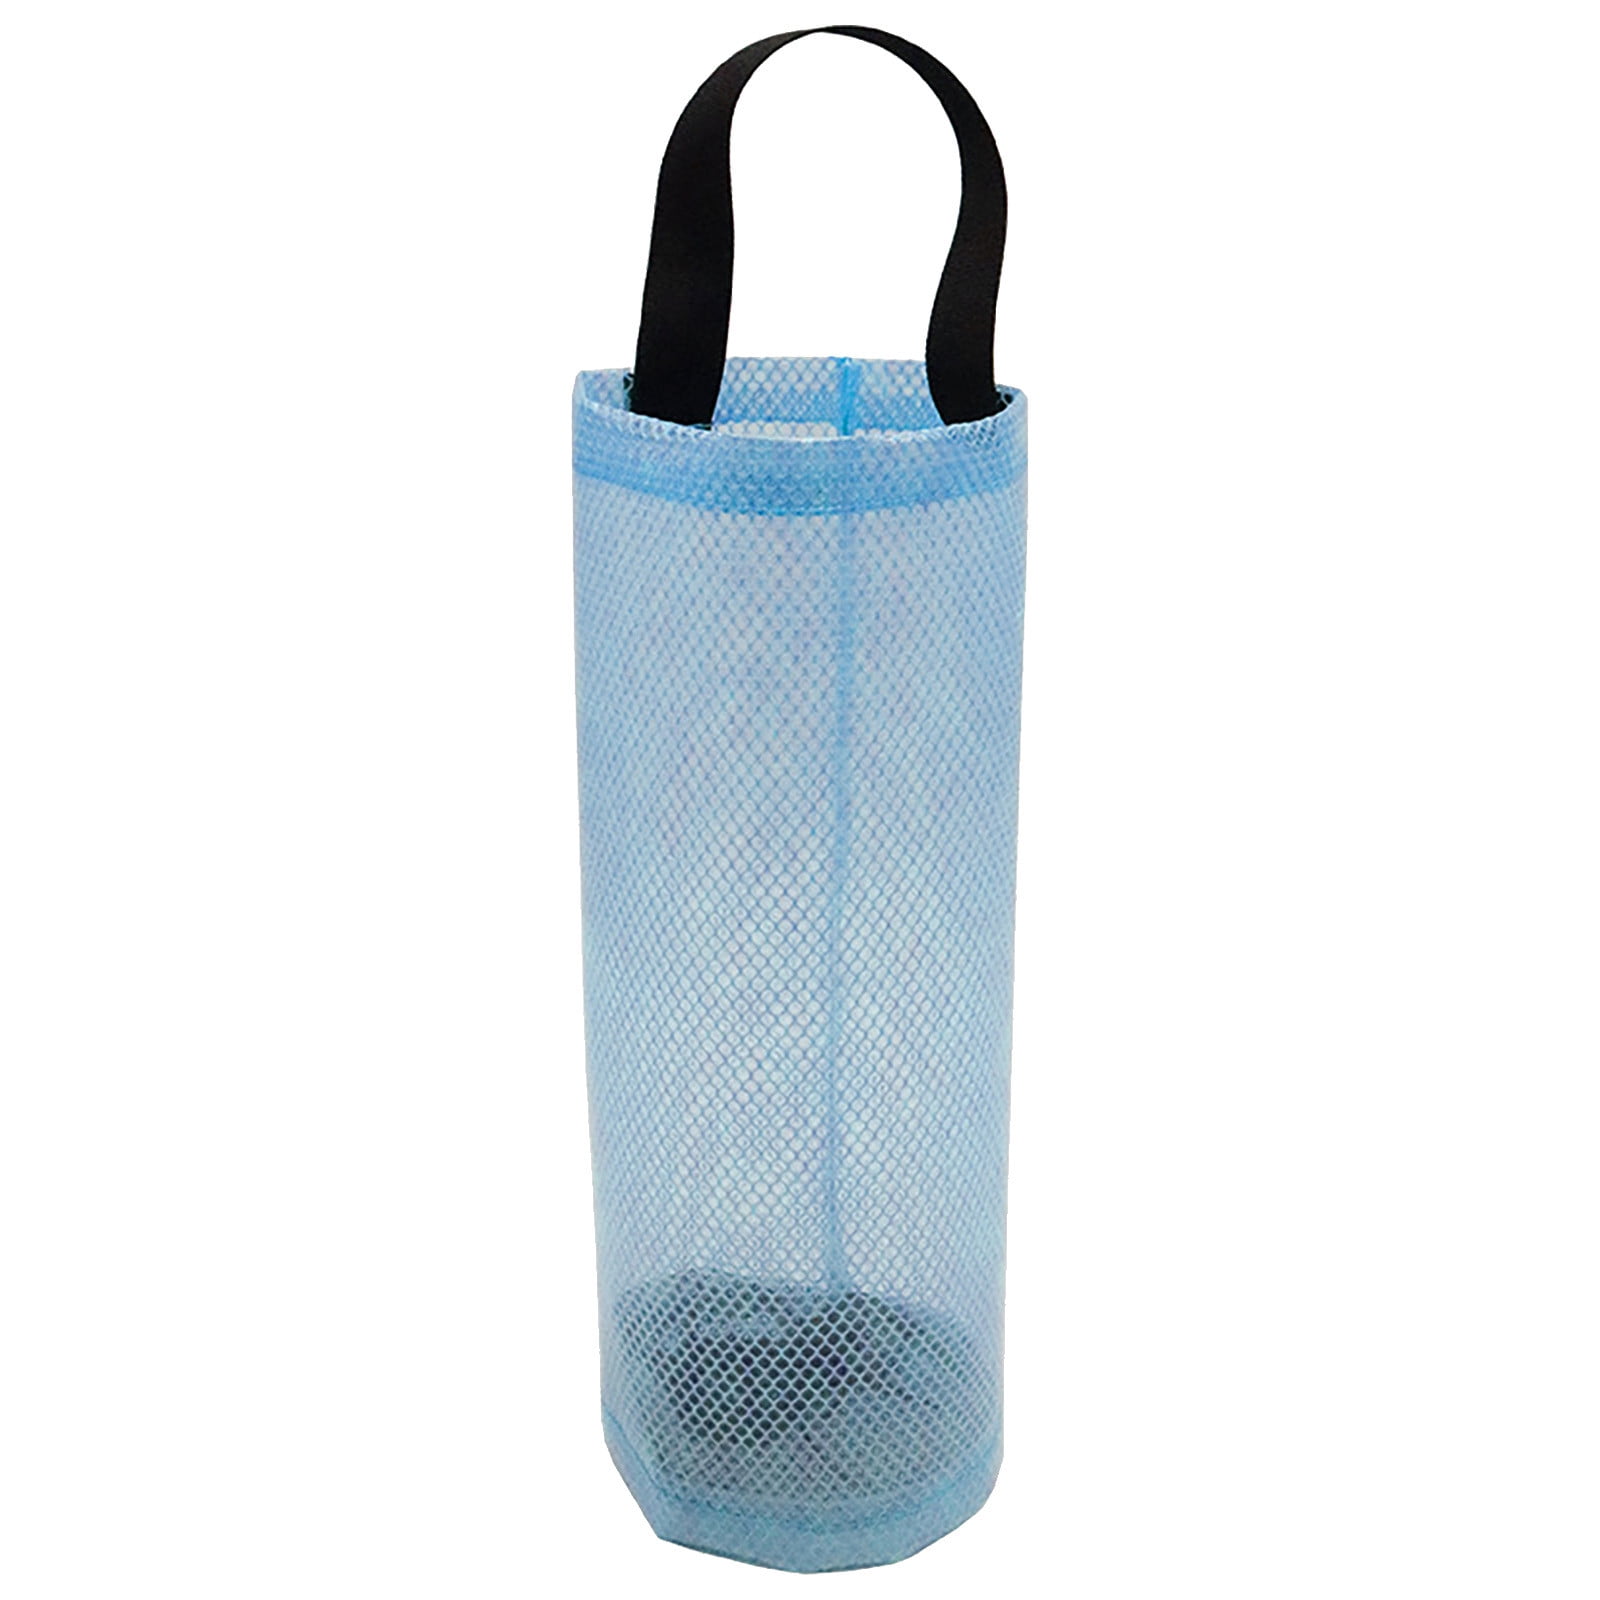 VOSS Hanging Hanging Rubbish Bag Bag Extraction Bag Box Round ...